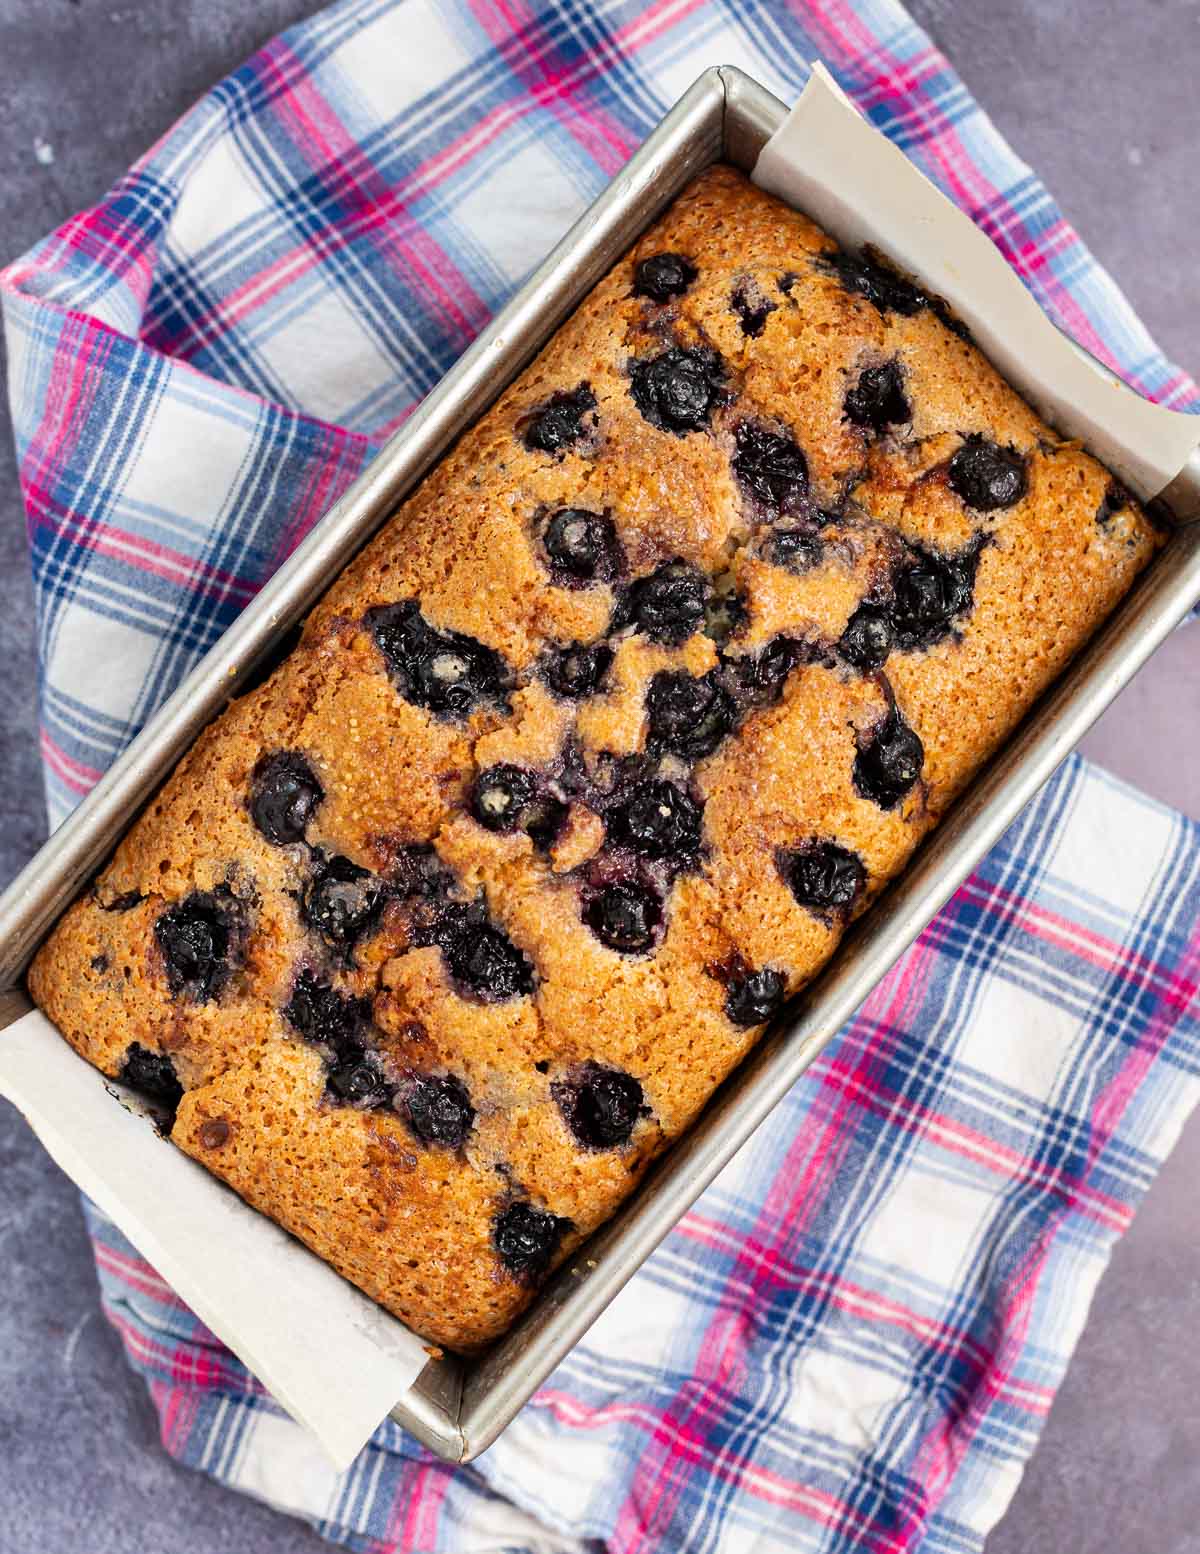 a golden blueberry cake in a loaf pan on a checked cloth